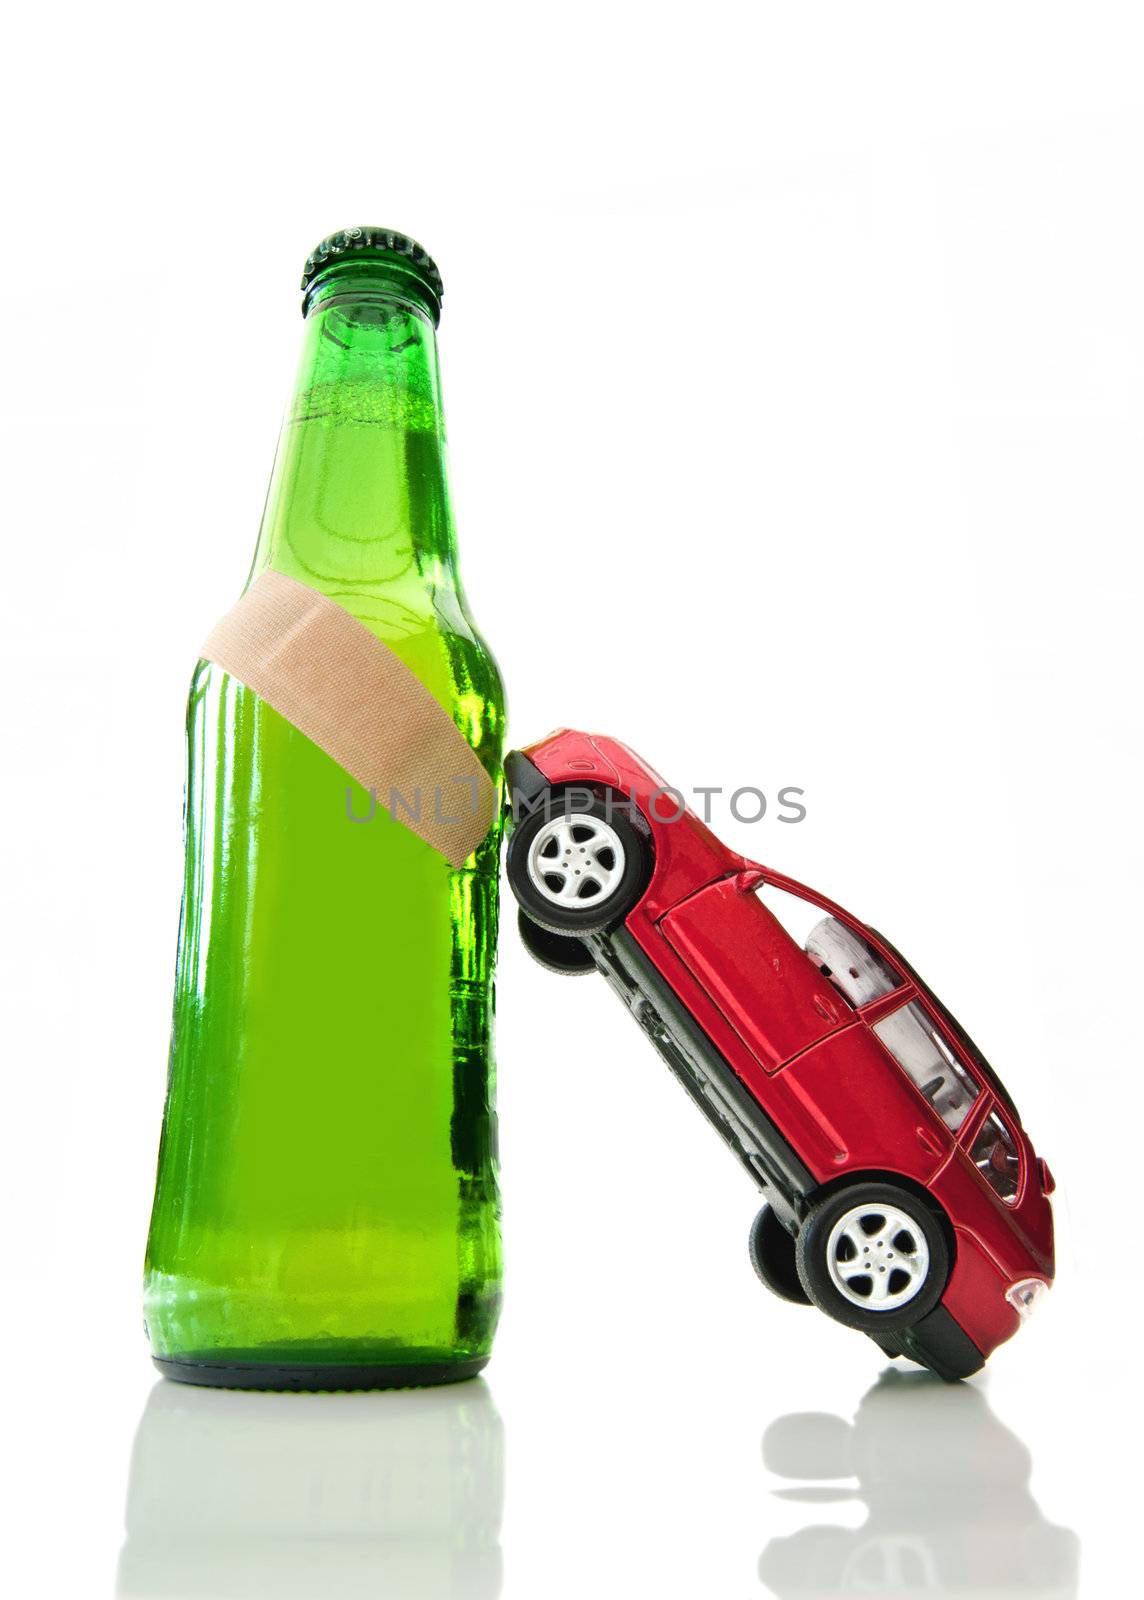 Miniature car leaning against a beer bottle with a band aid